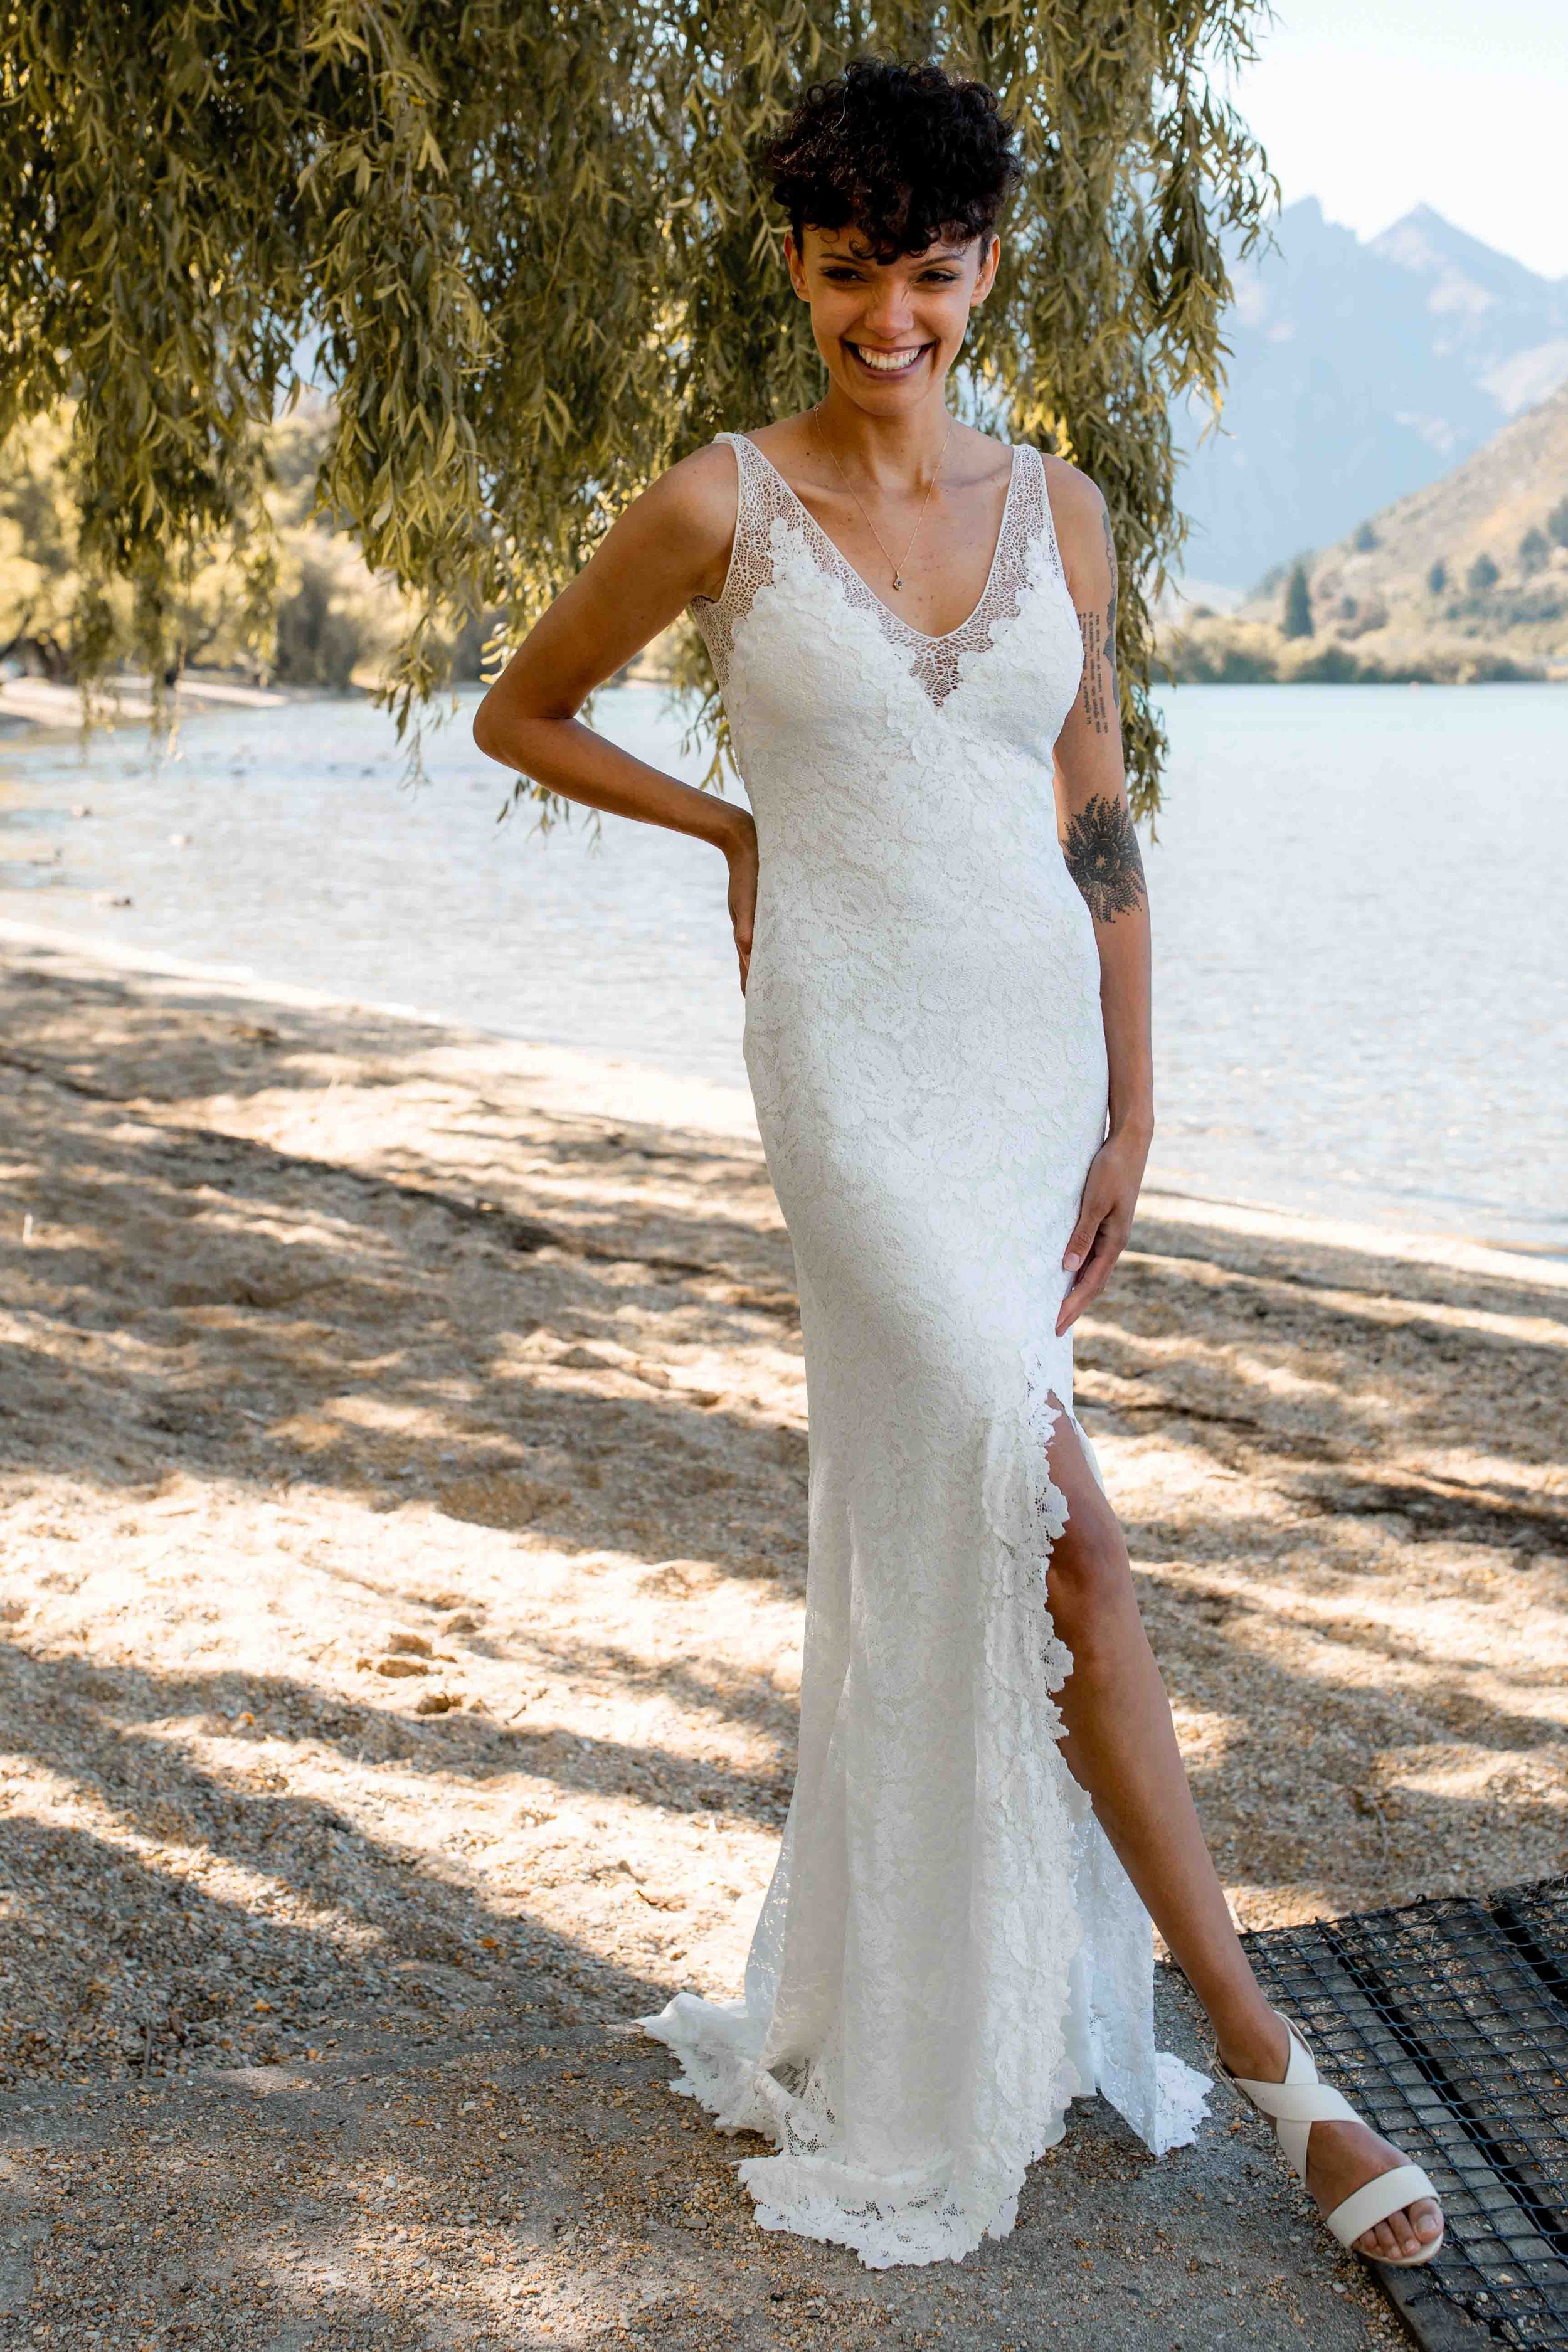 Kate Dress - Nemo Bridal Couture Queenstown New Zealand 0V9A2433.jpg